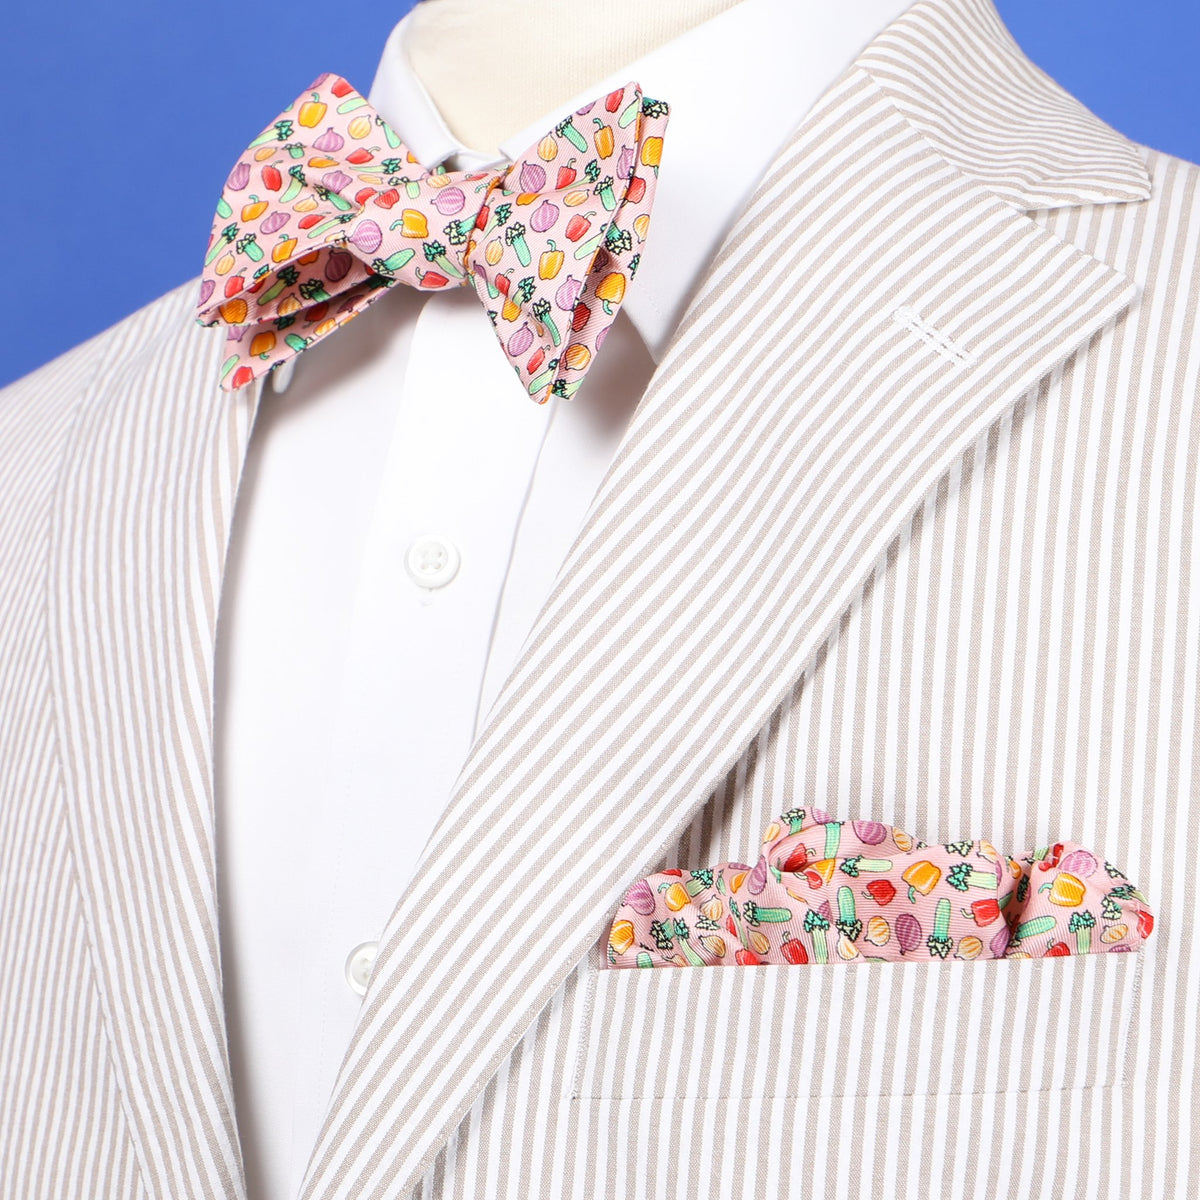 Limited Edition NOLA Couture X Haspel Pink Holy Trinity Print Bow Tie - O/S